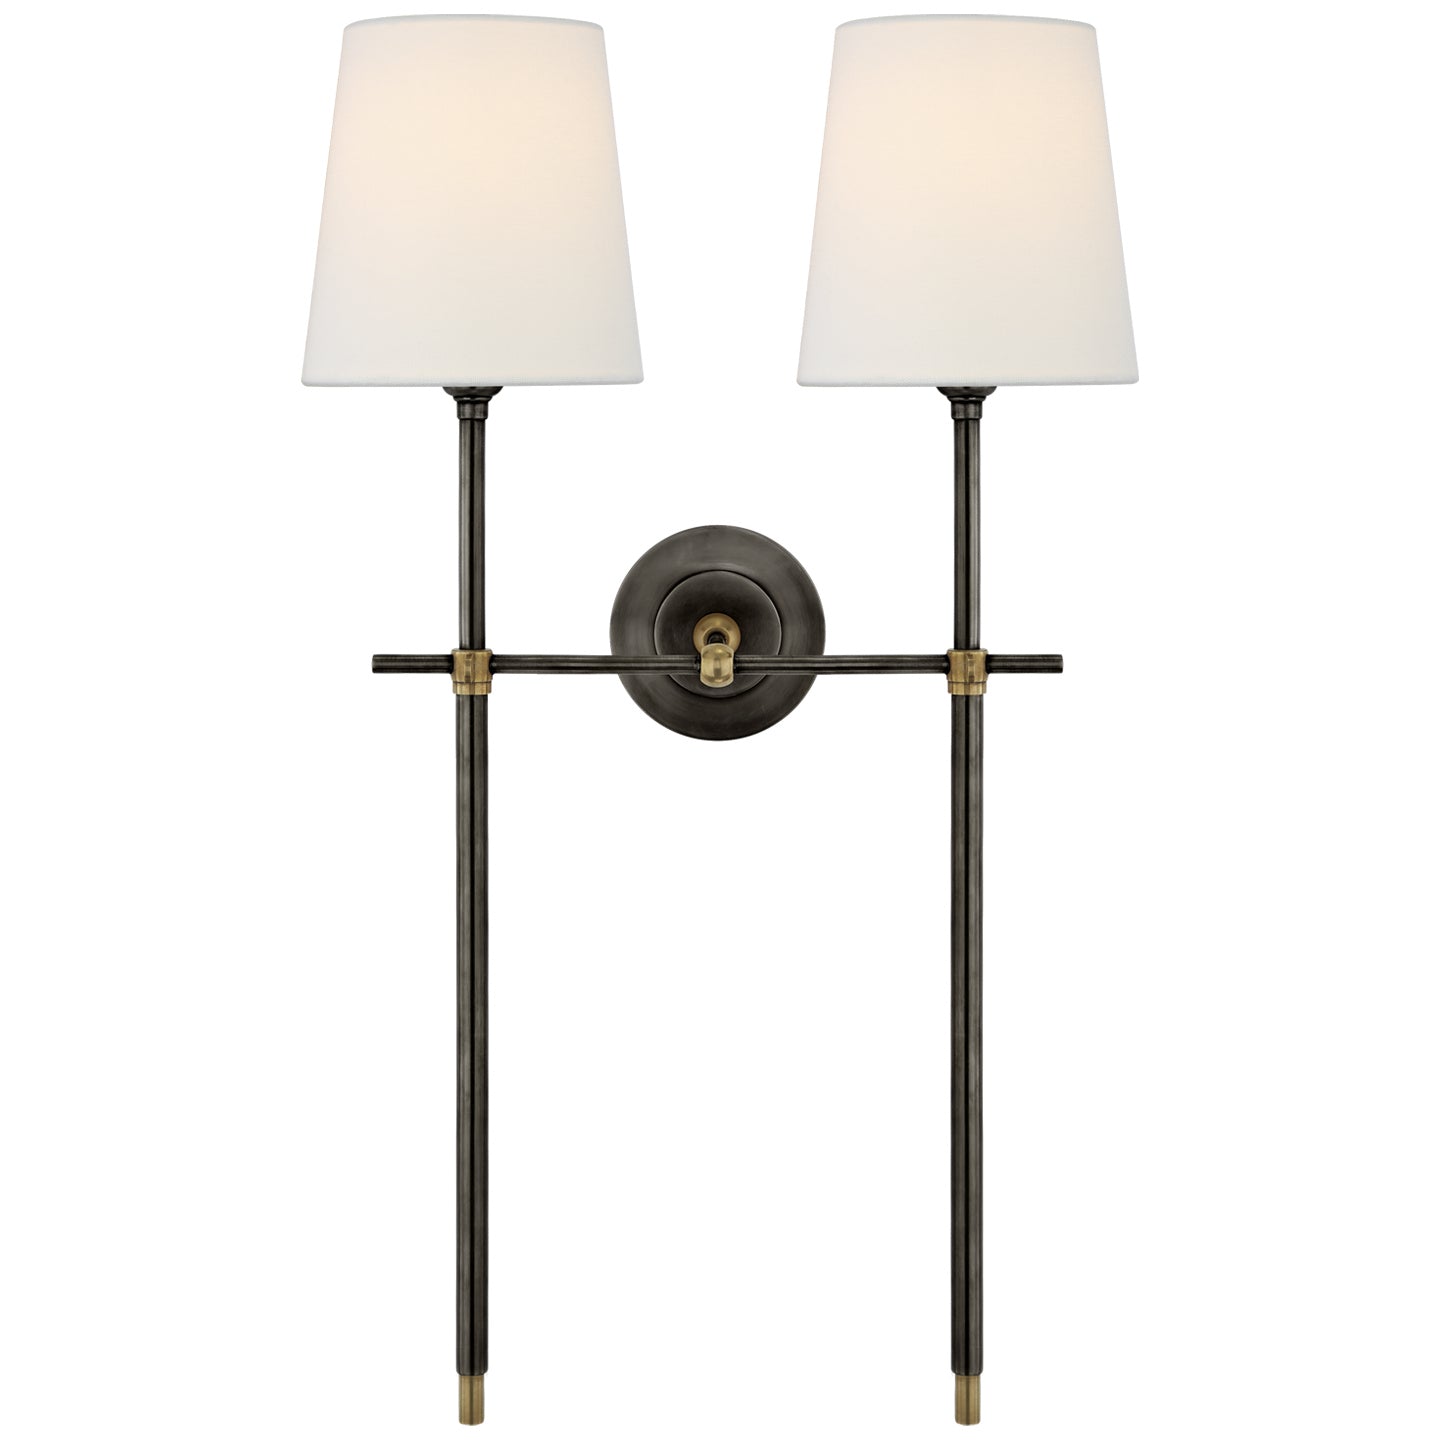 Visual Comfort Signature - TOB 2025BZ/HAB-L - Two Light Wall Sconce - Bryant - Bronze and Hand-Rubbed Antique Brass